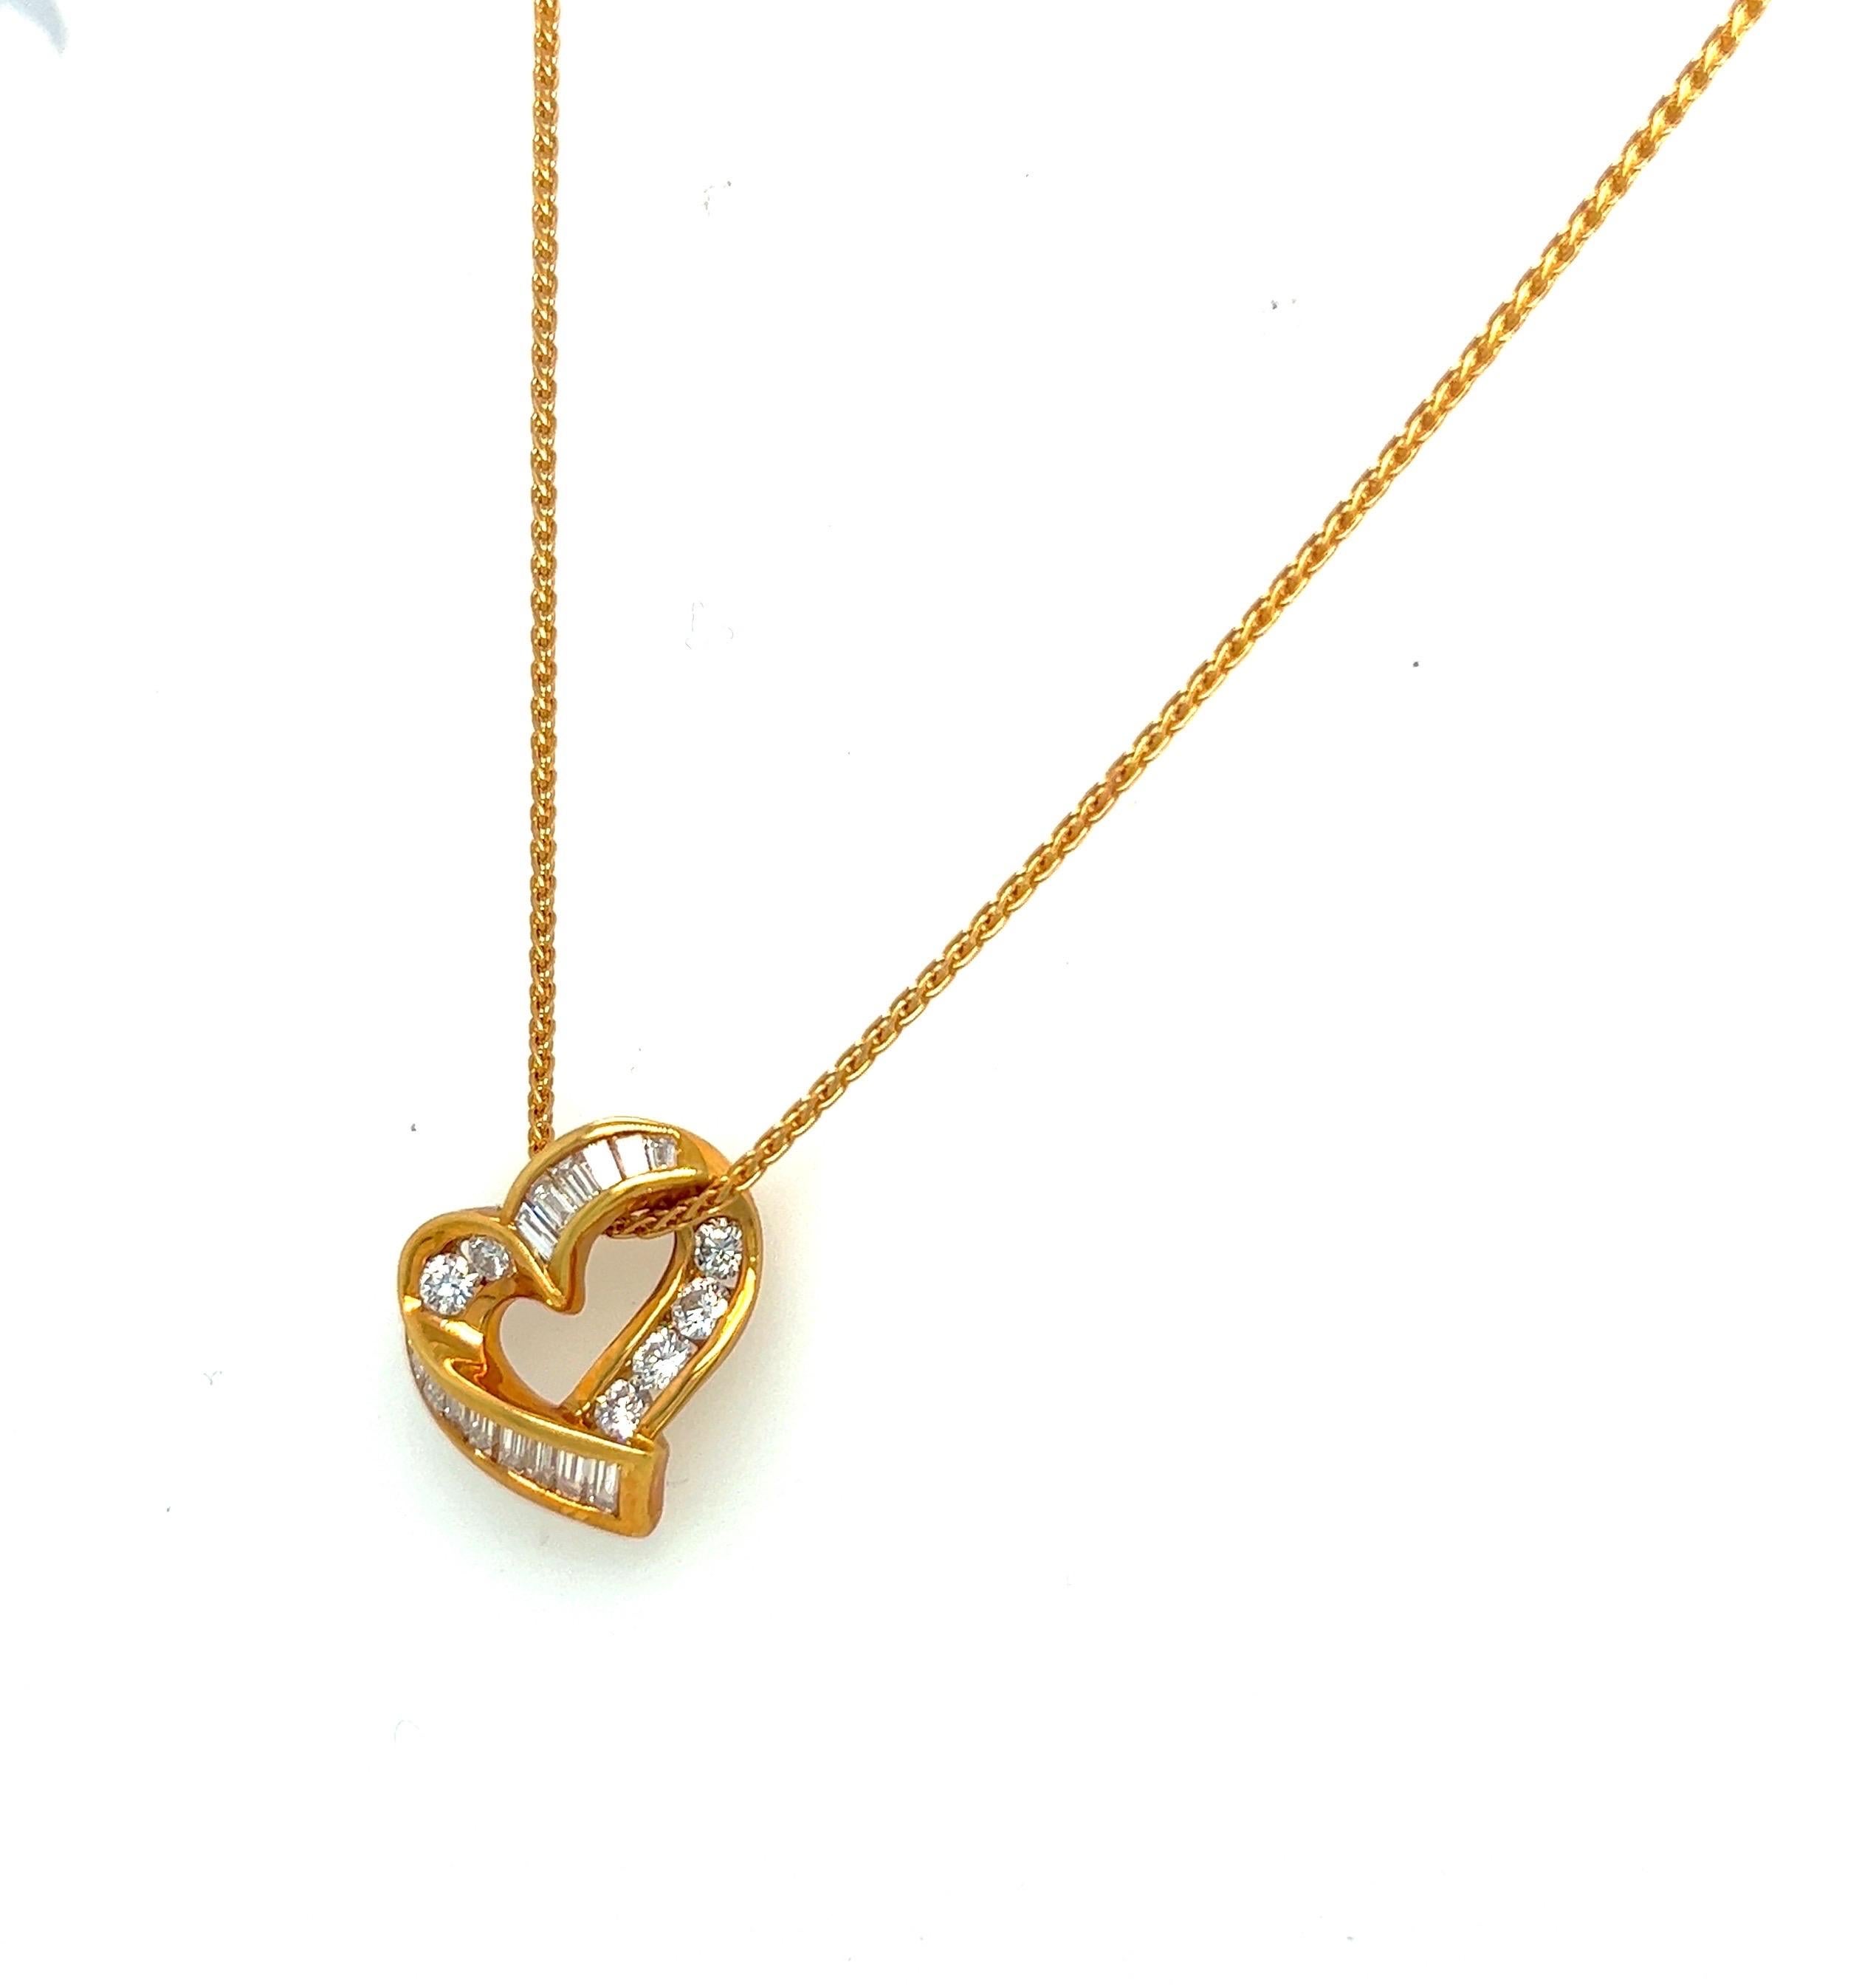 Charles Krypell Jewelry is a New York Based fine jewelry brand that became internationally known for its exquisite use of color, novel designs, and outstanding craftsmanship. 
This 18 karat yellow gold heart is set with invisibly set tapered